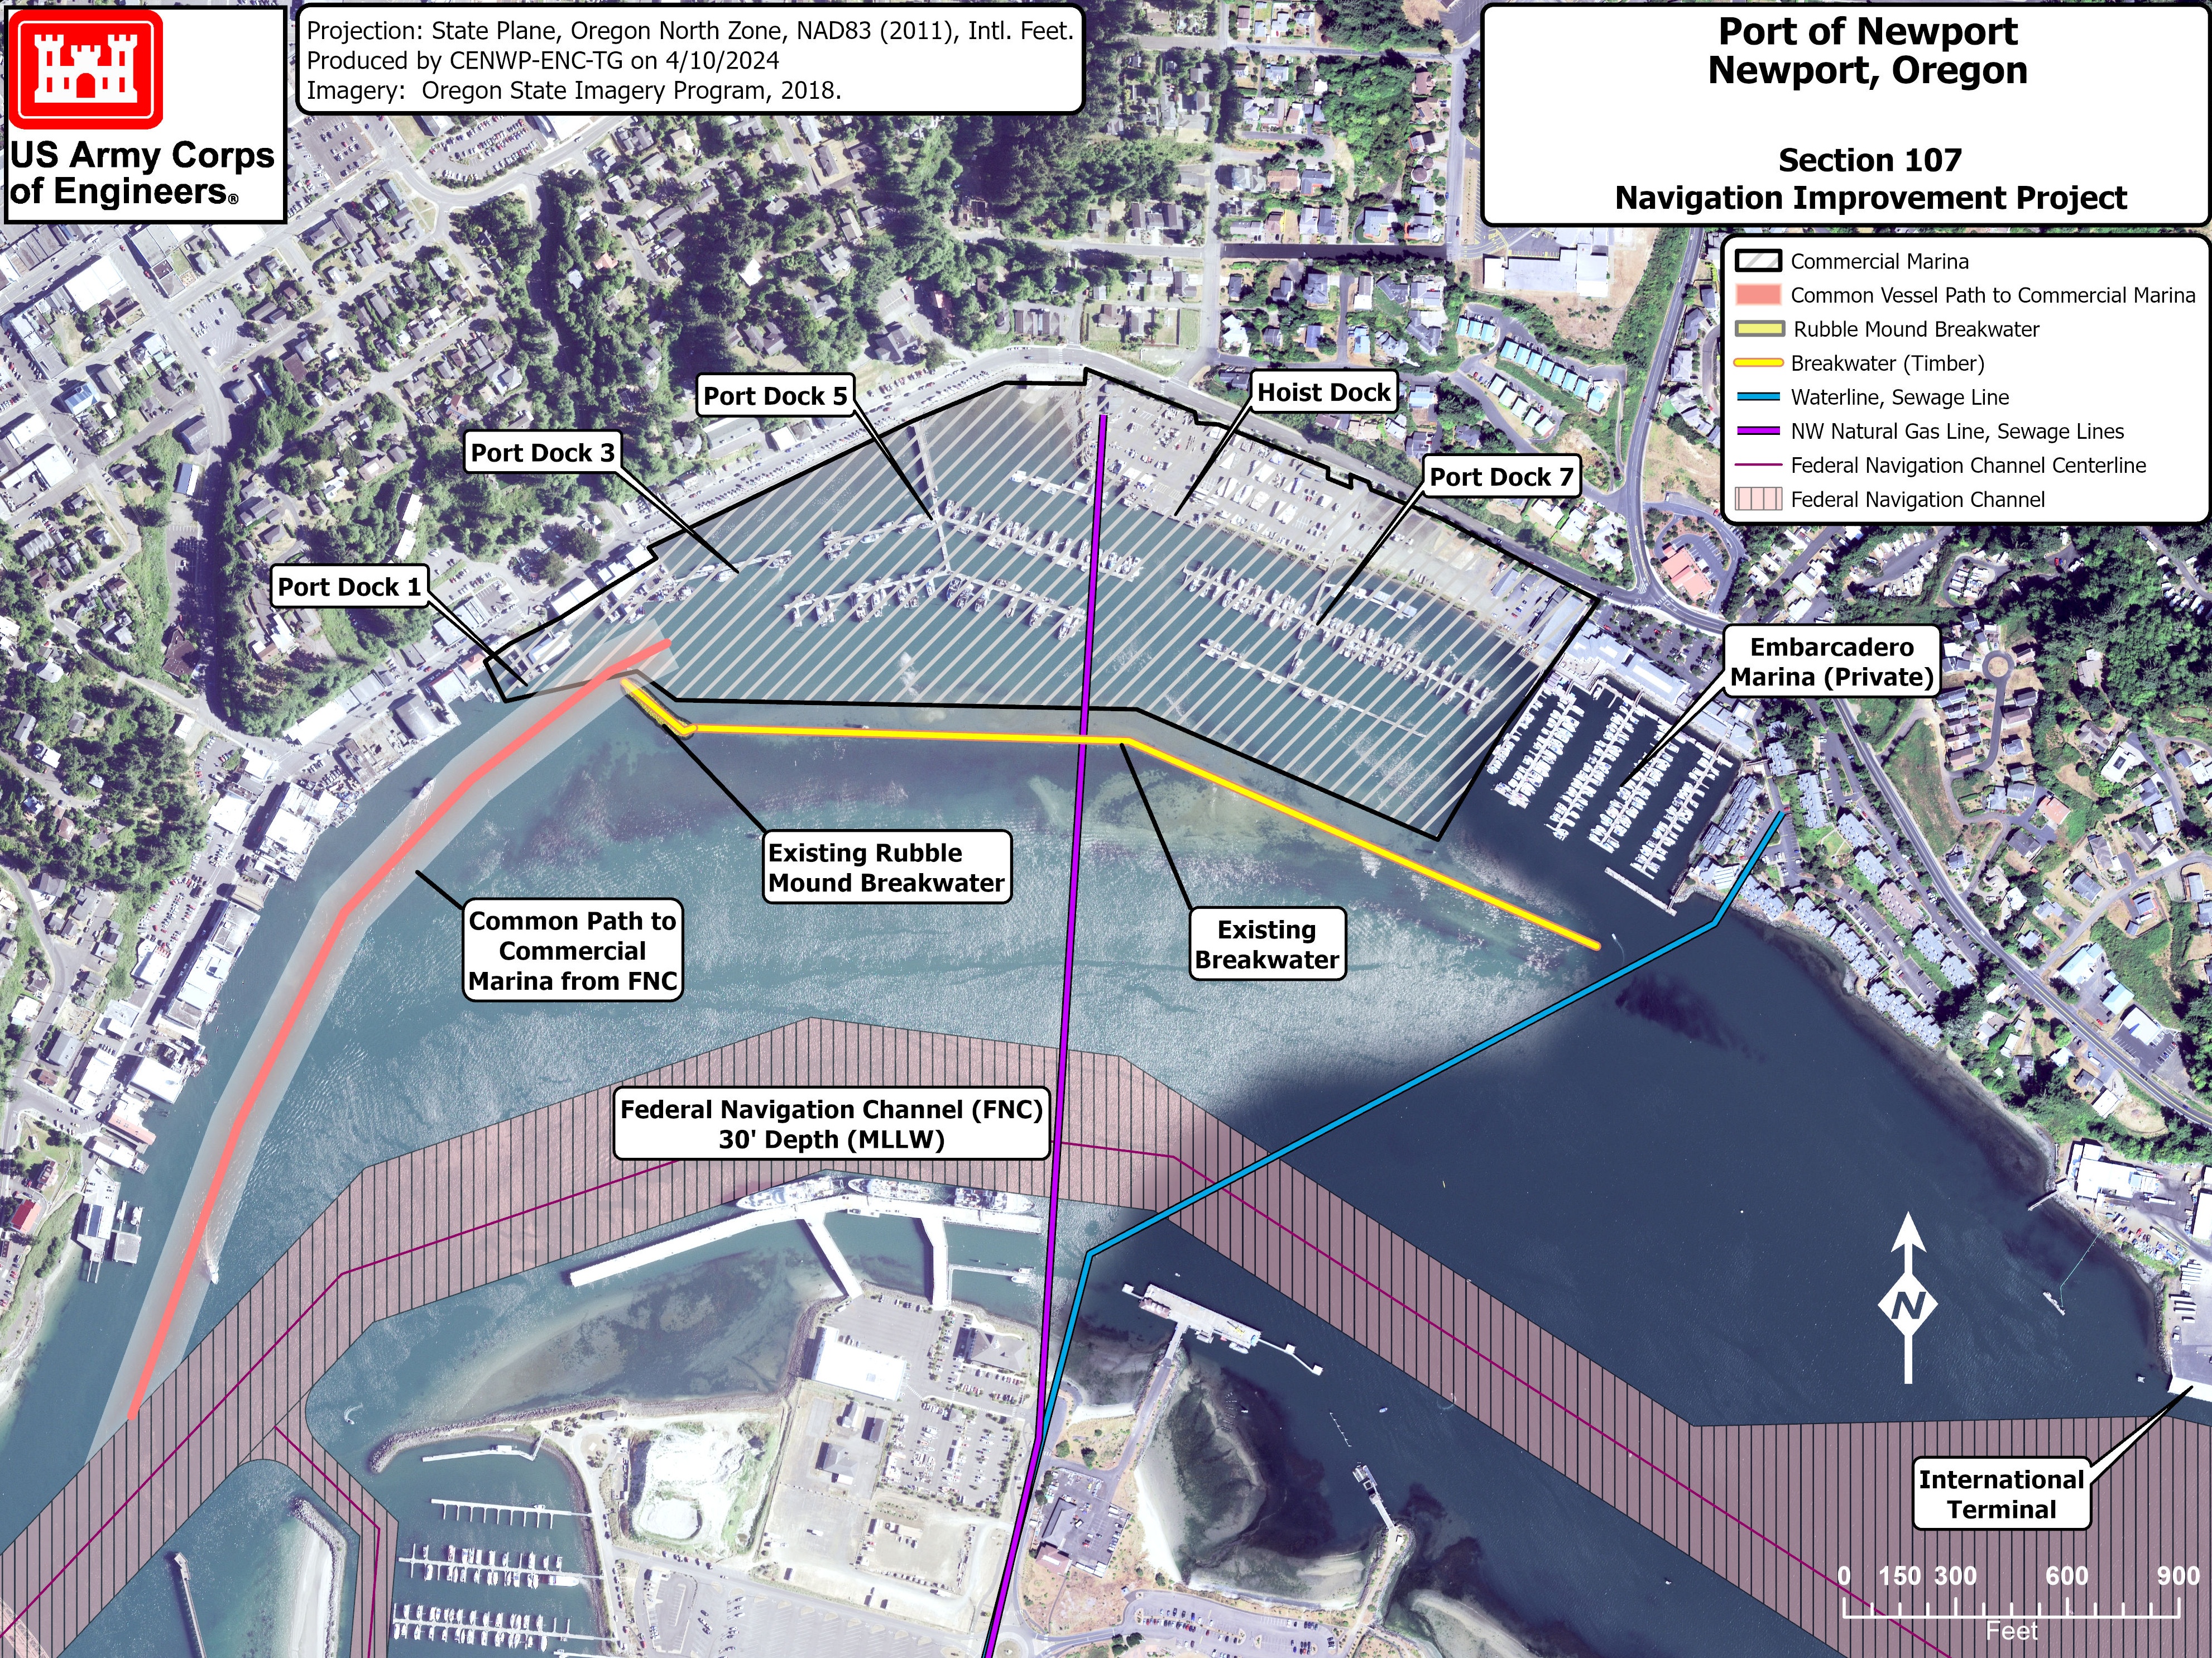 Map of the Port of Newport Commercial Marina with the following features indicated: the Commercial Marina Docks, the Commercial Marina Breakwater, the Private Embarcadero Marina, the International Terminal, and the Federal Navigation Channel and the common path from the Federal Navigation channel to the west side of the Commercial Marina